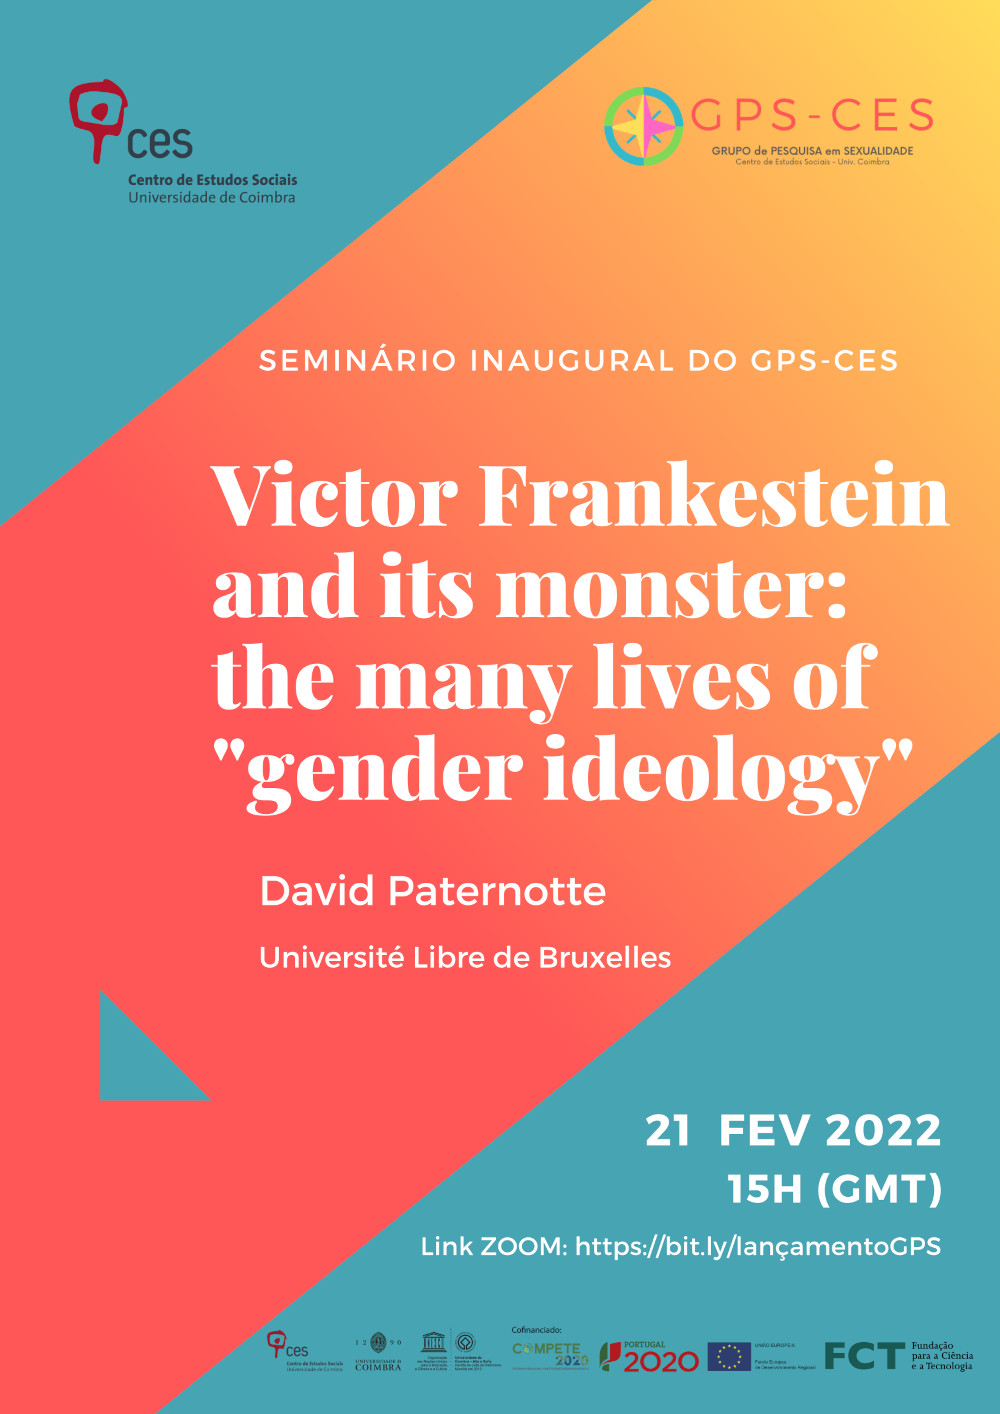 Victor Frankenstein and its monster: the many lives of "gender ideology"<span id="edit_37338"><script>$(function() { $('#edit_37338').load( "/myces/user/editobj.php?tipo=evento&id=37338" ); });</script></span>